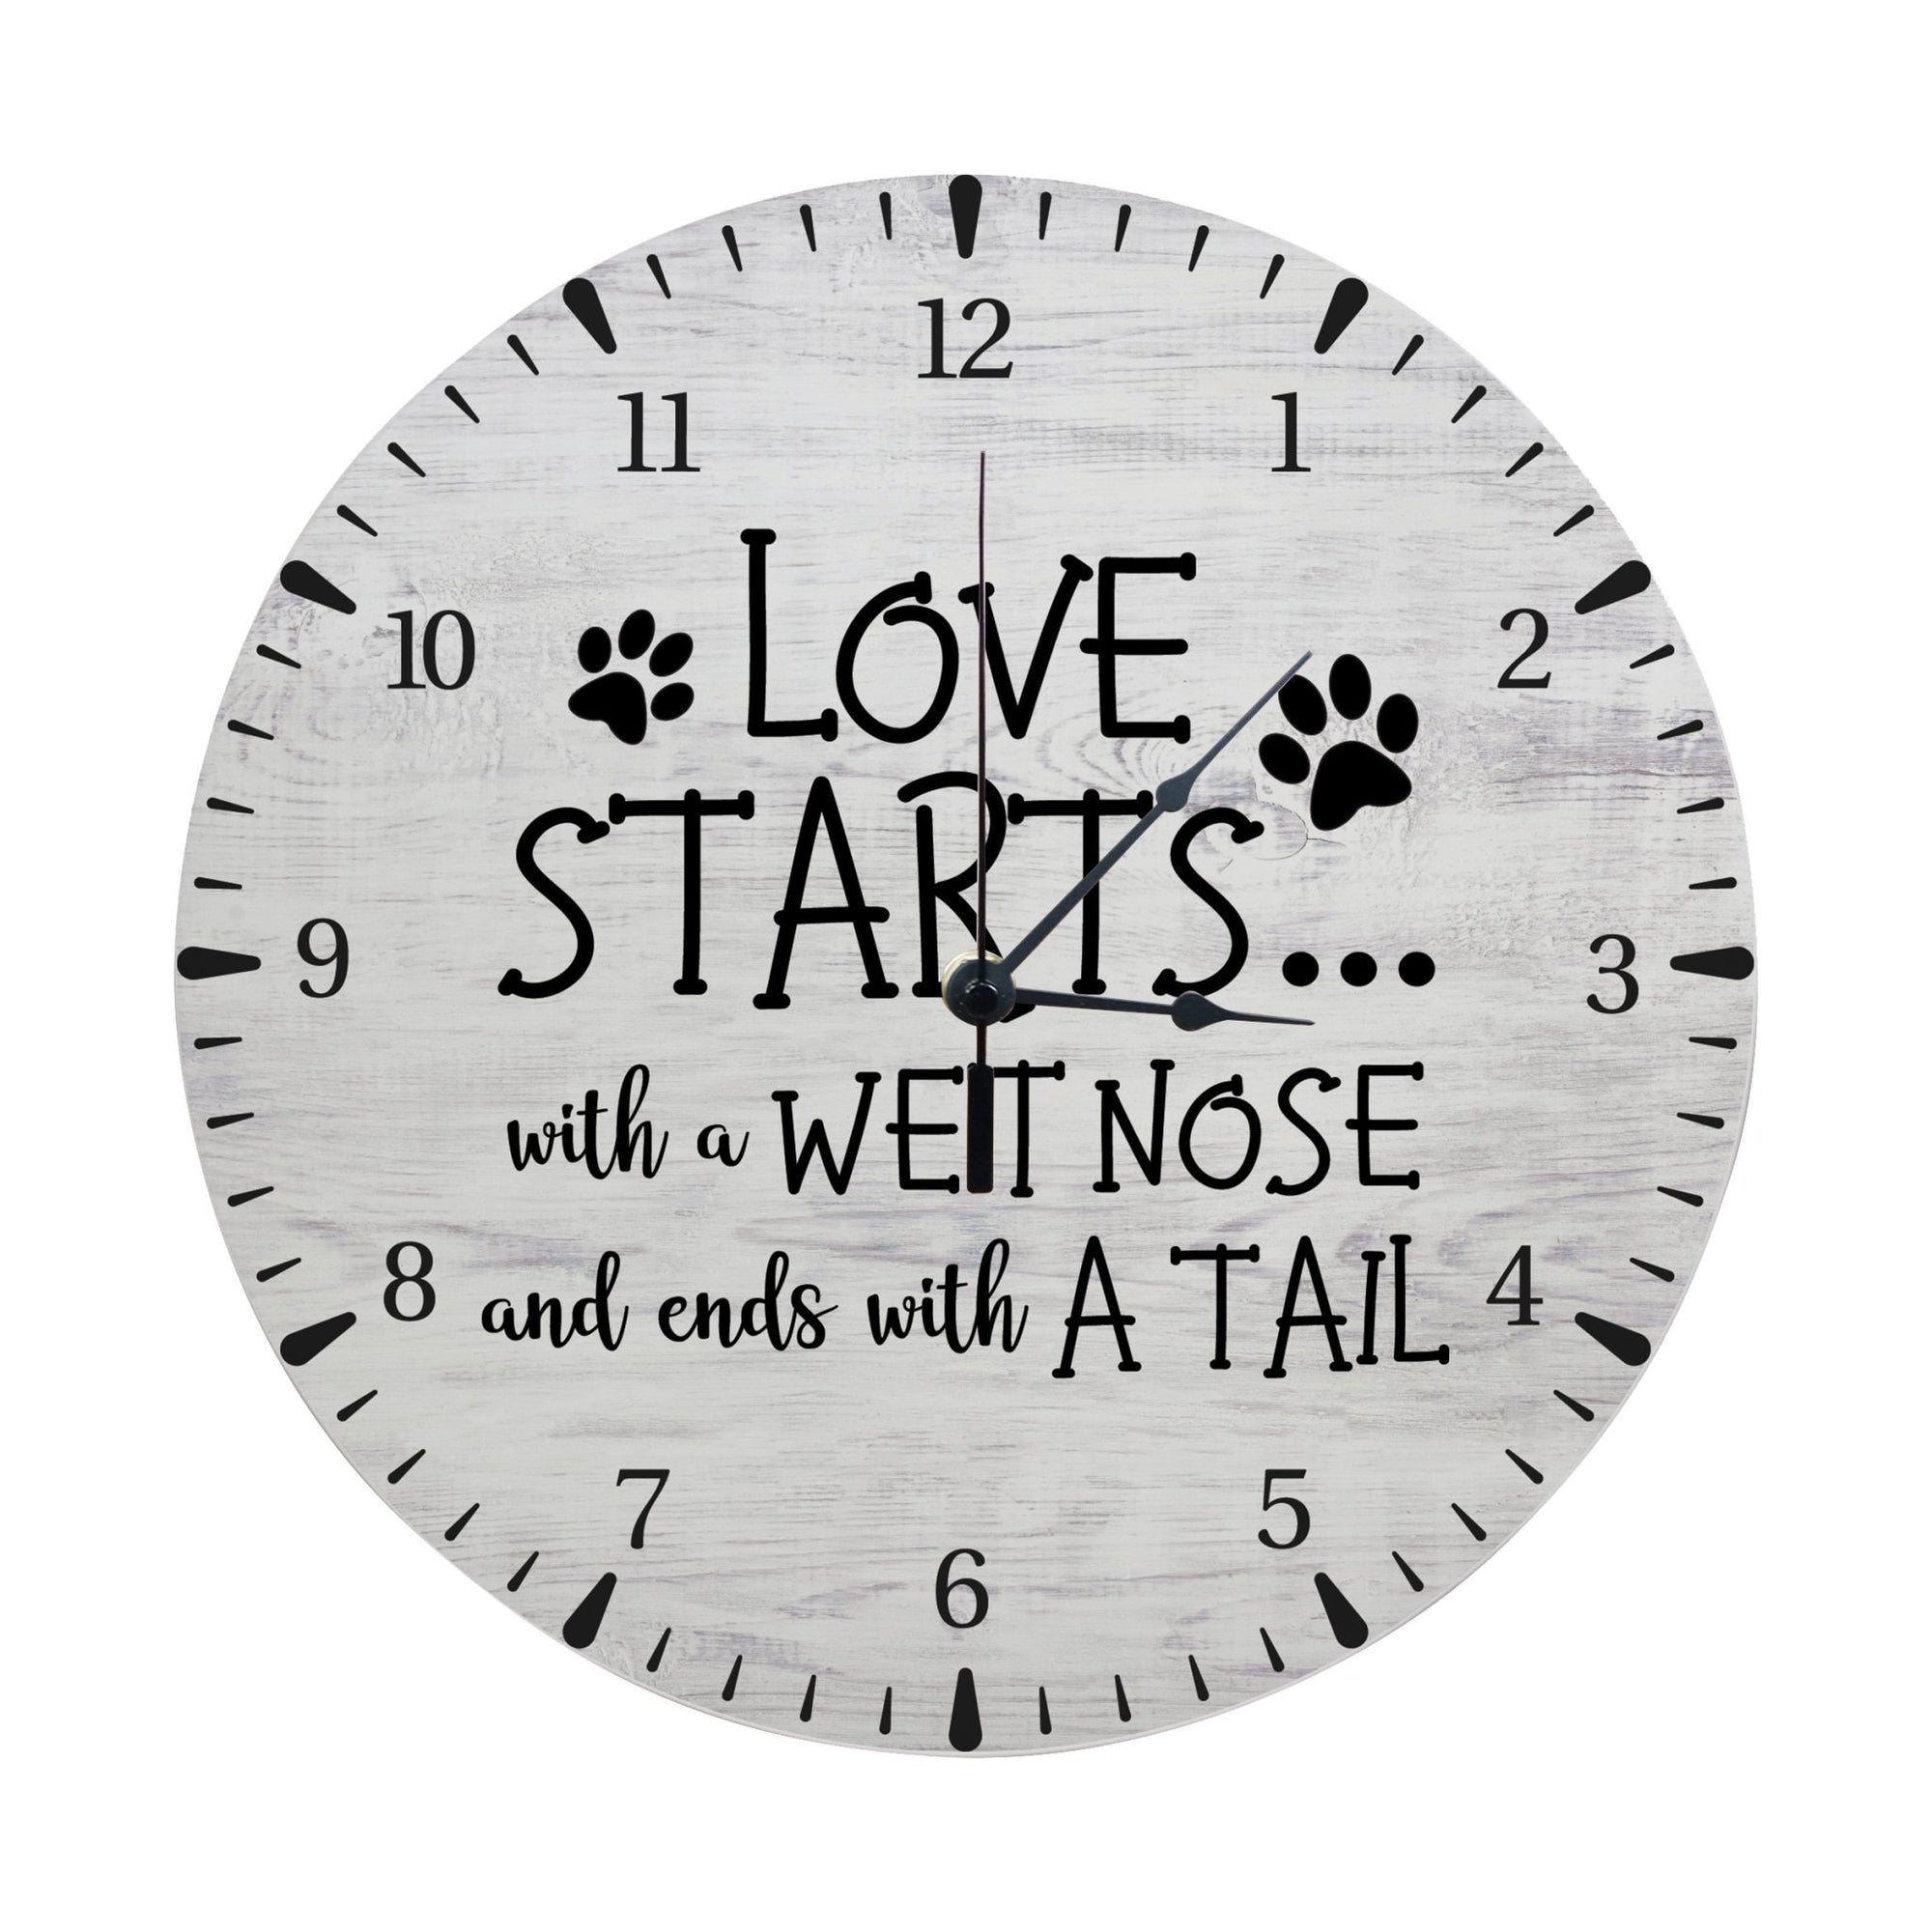 Minimalist Roman Numeral Wooden Clock For Walls Or Countertop Display For Pet Owners - Loves Starts - LifeSong Milestones